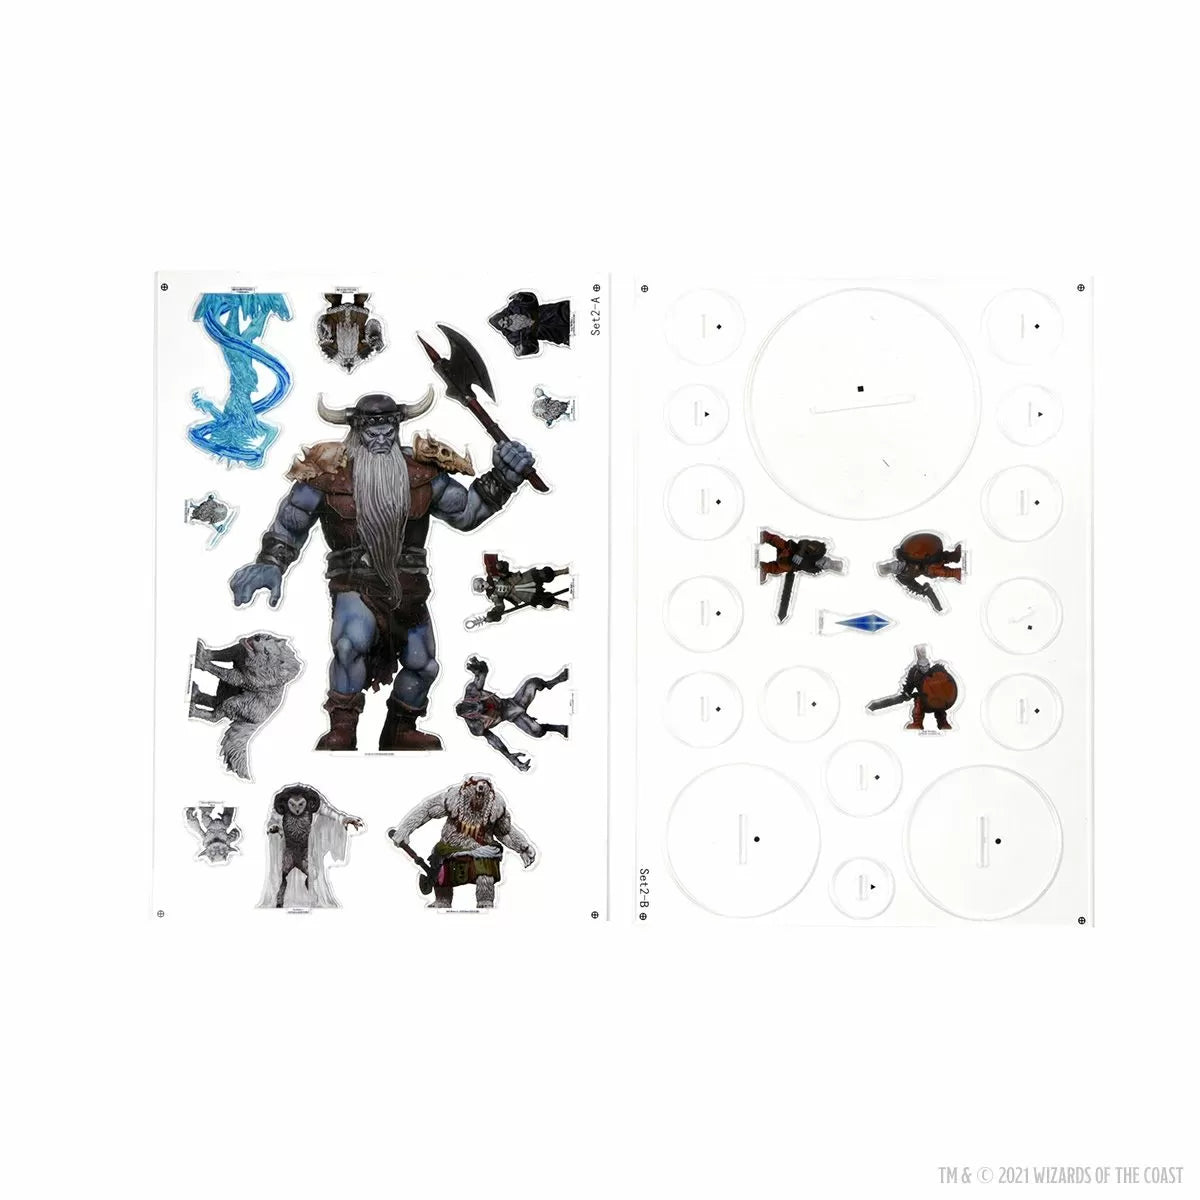 Dungeons &amp; Dragons Idols of the Realms Miniatures Icewind Dale Rime of the Frostmaiden-2D Frost Giant